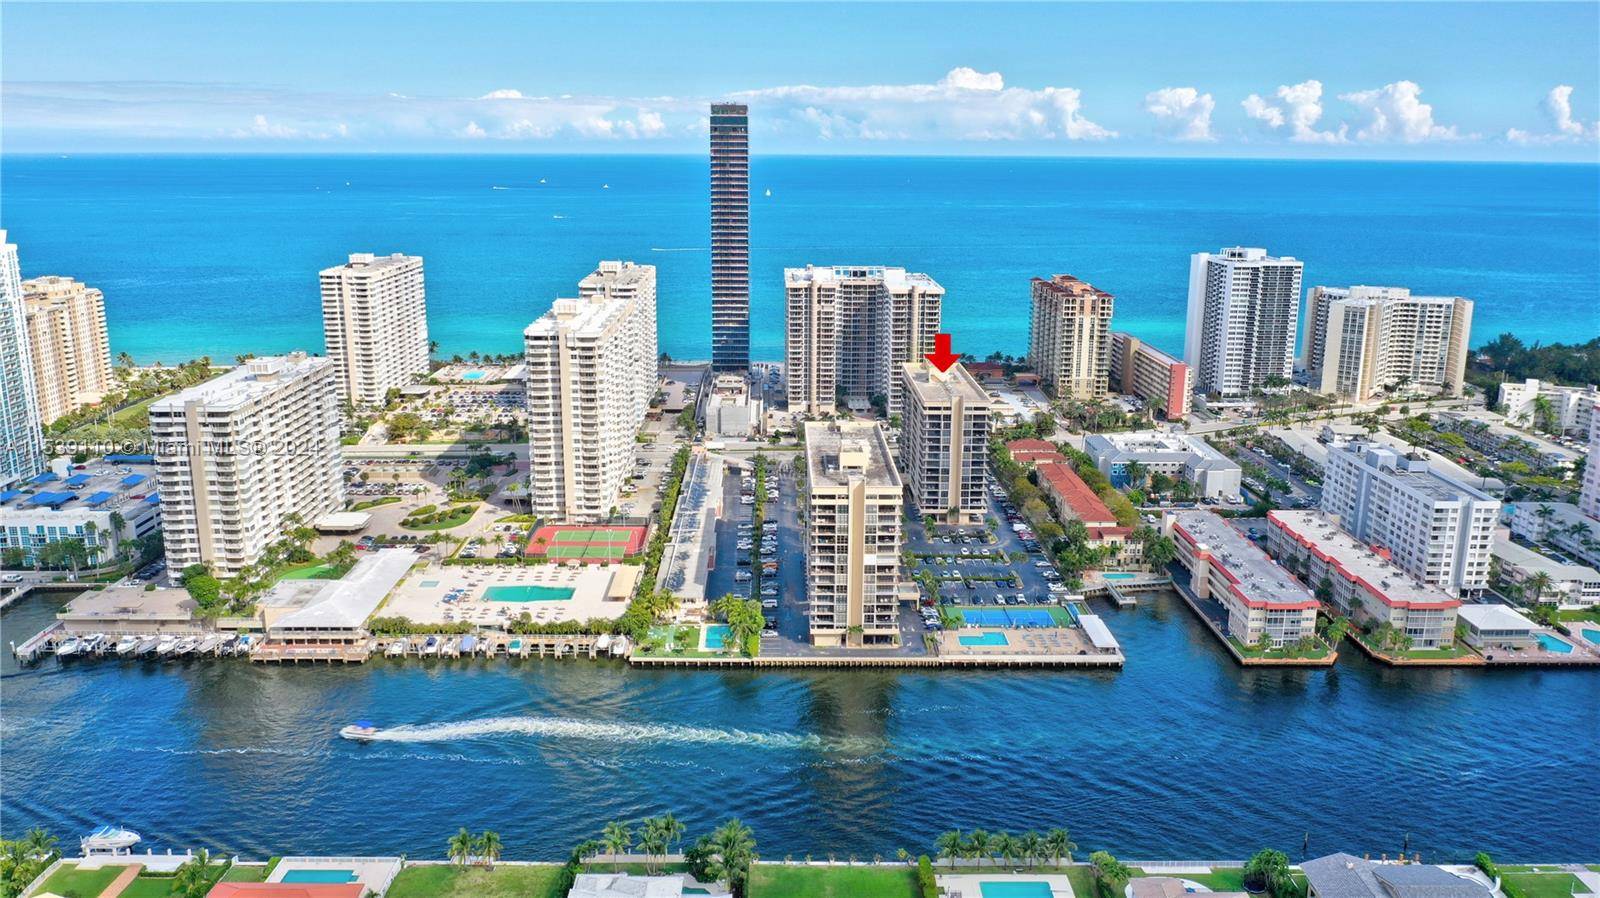 STEP INSIDE THIS STUNNING LUXURY MODERN COMPLETELY RENOVATED 2 BEDROOM, 2 BATH DEN CORNER UNIT WITH WRAP AROUND BALCONY AND DIRECT BEACH ACCESS !